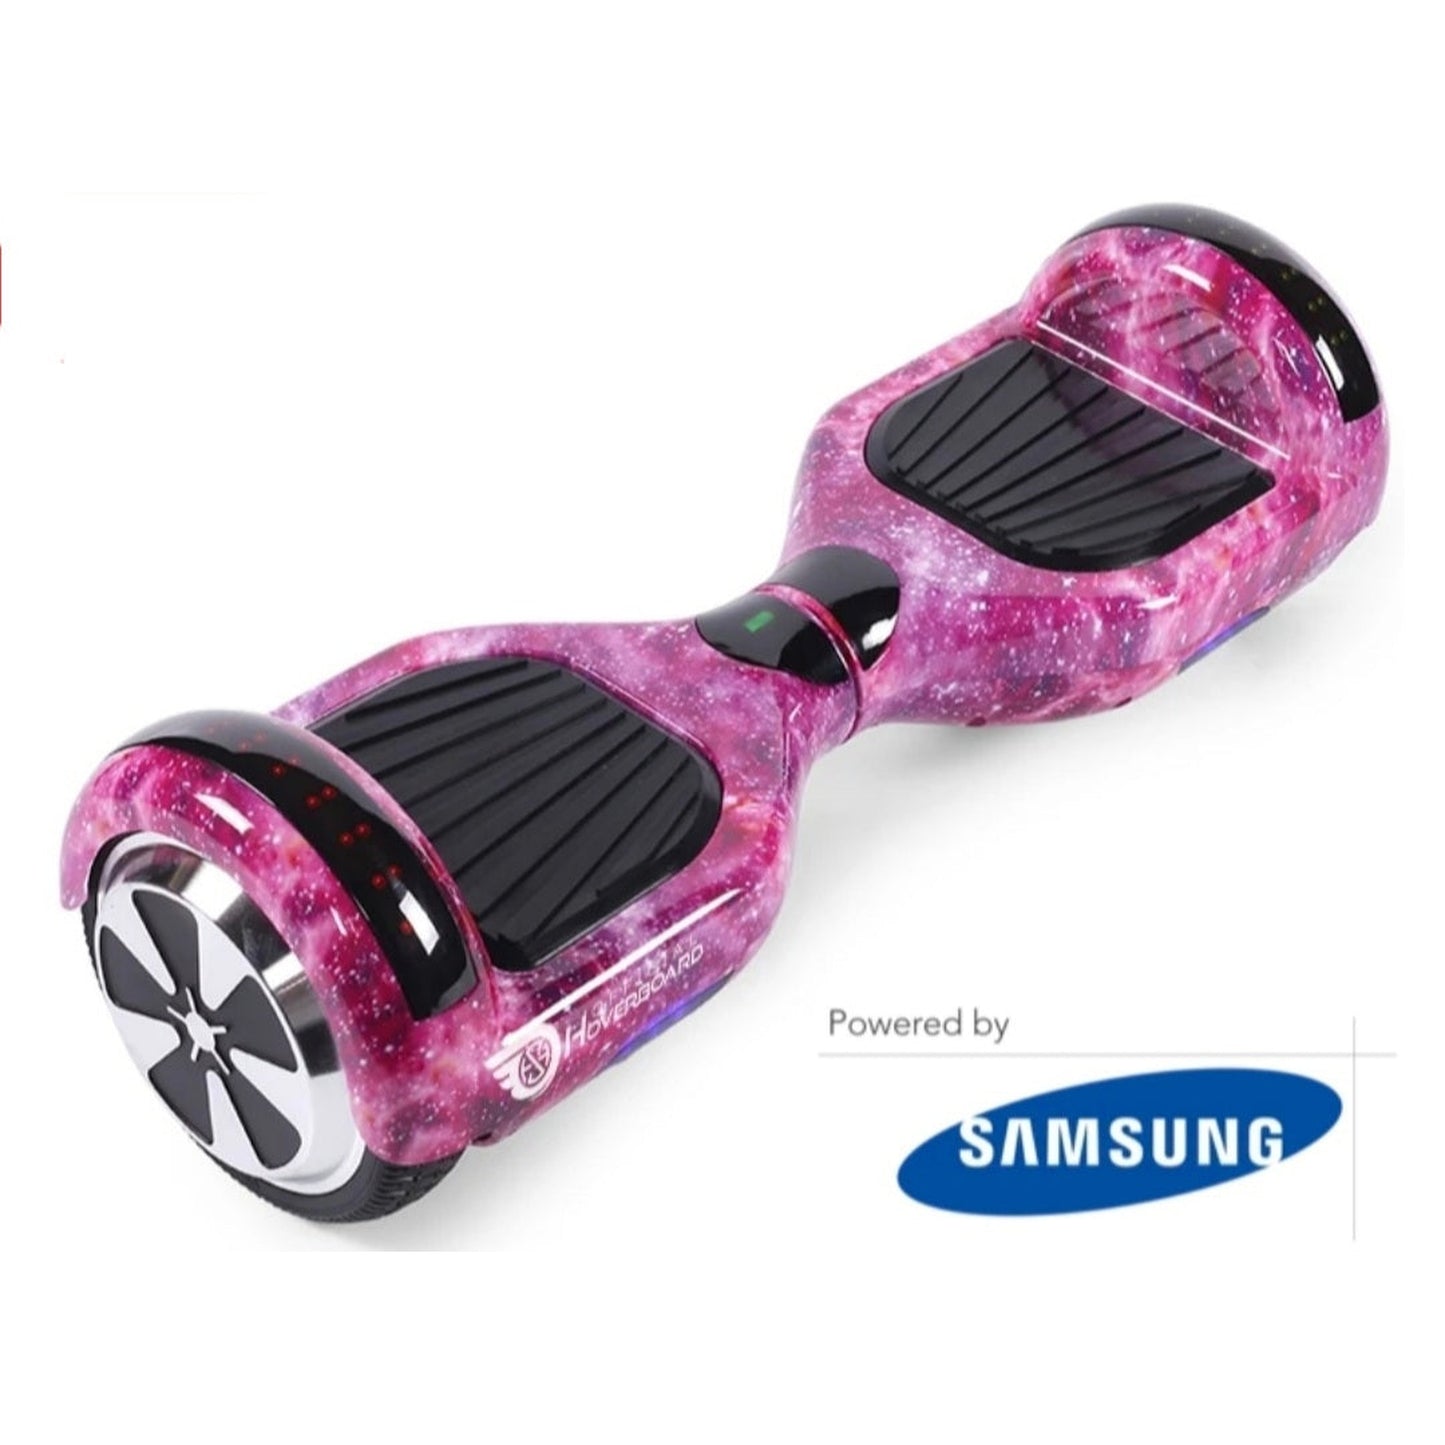 Hoverboard Pink Galaxy 6.5 Bluetooth LED